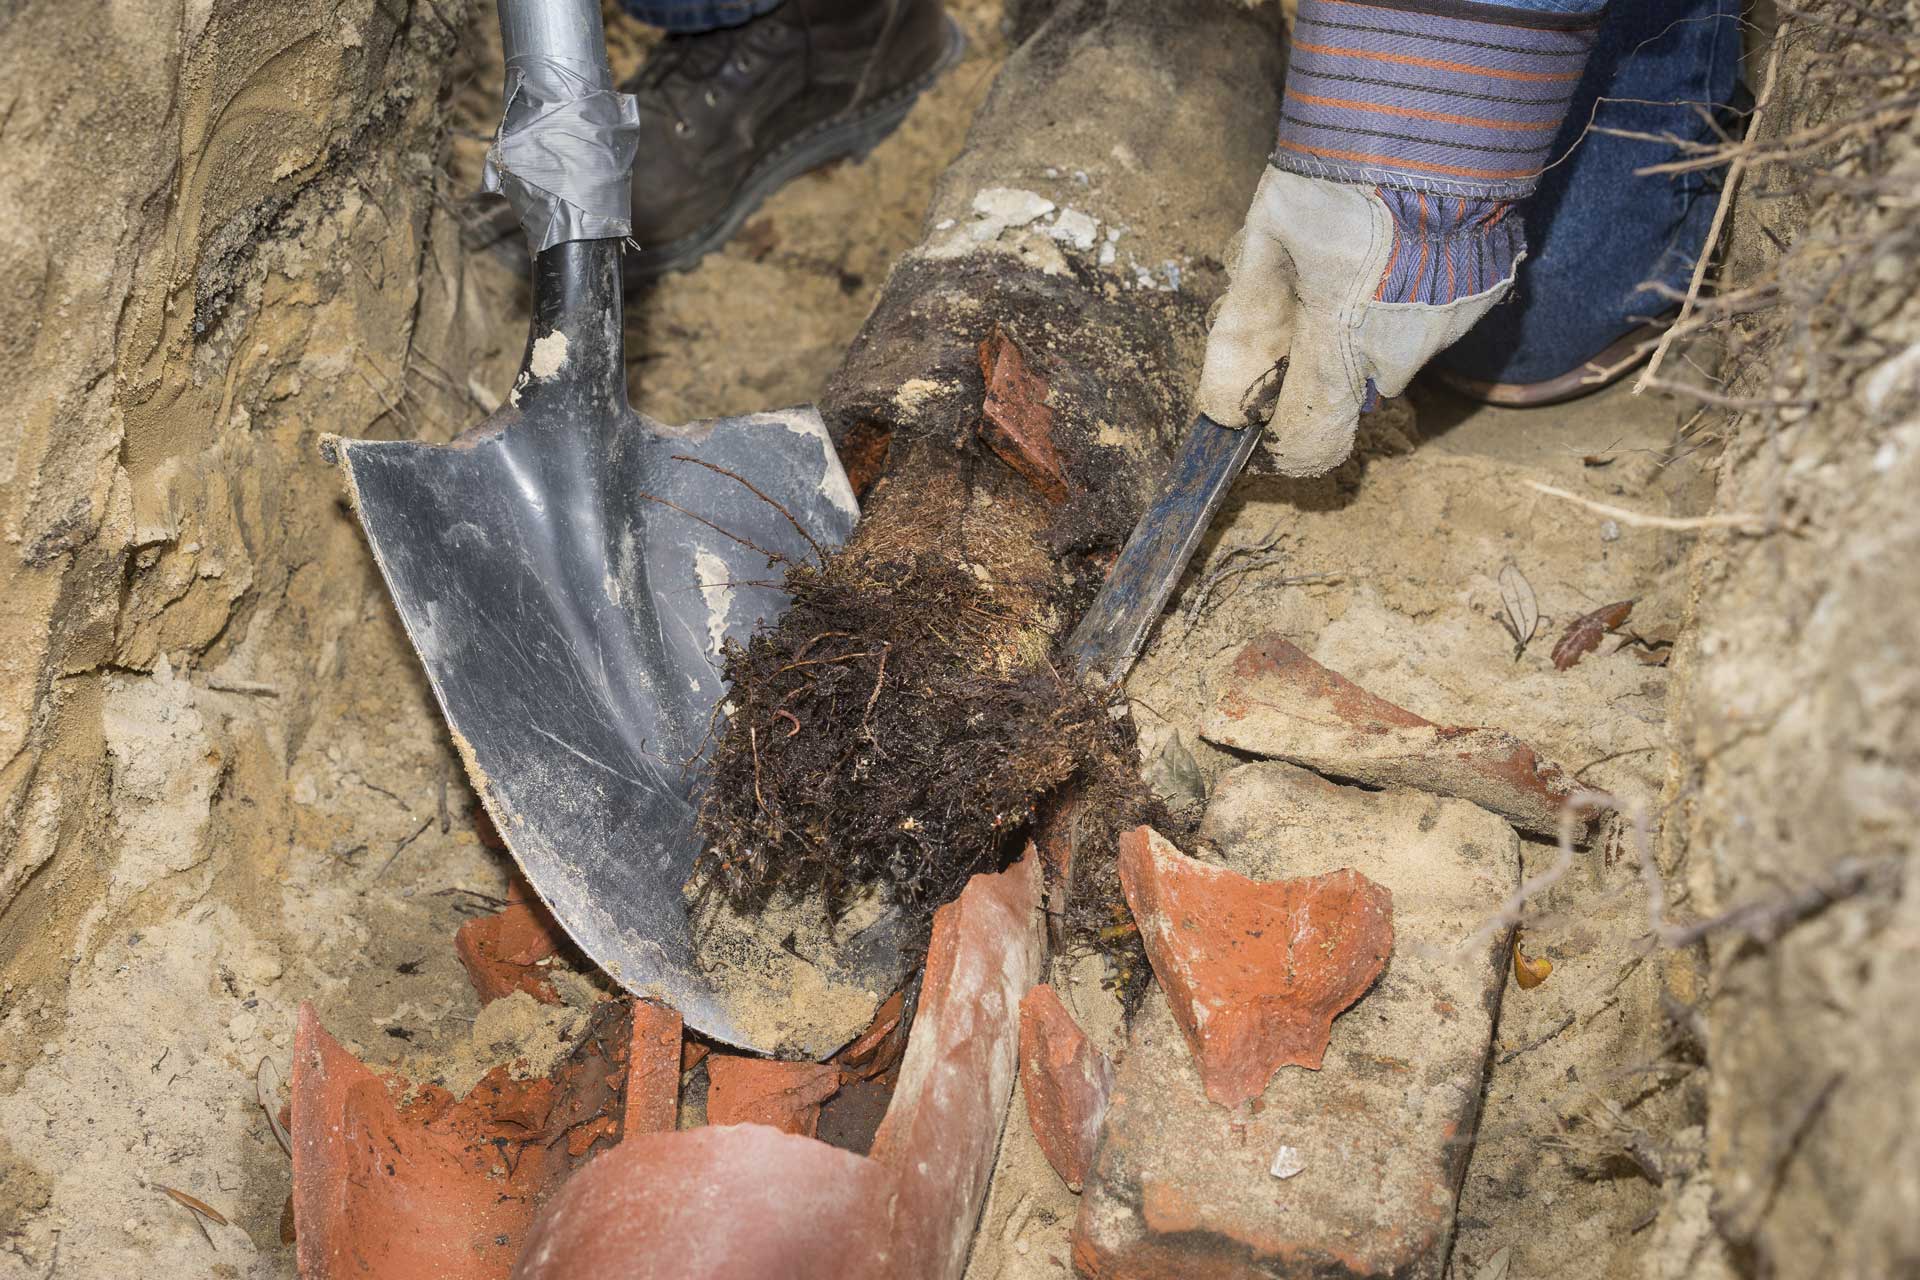 How Do I Know If I Need A Sewer Line Replacement?